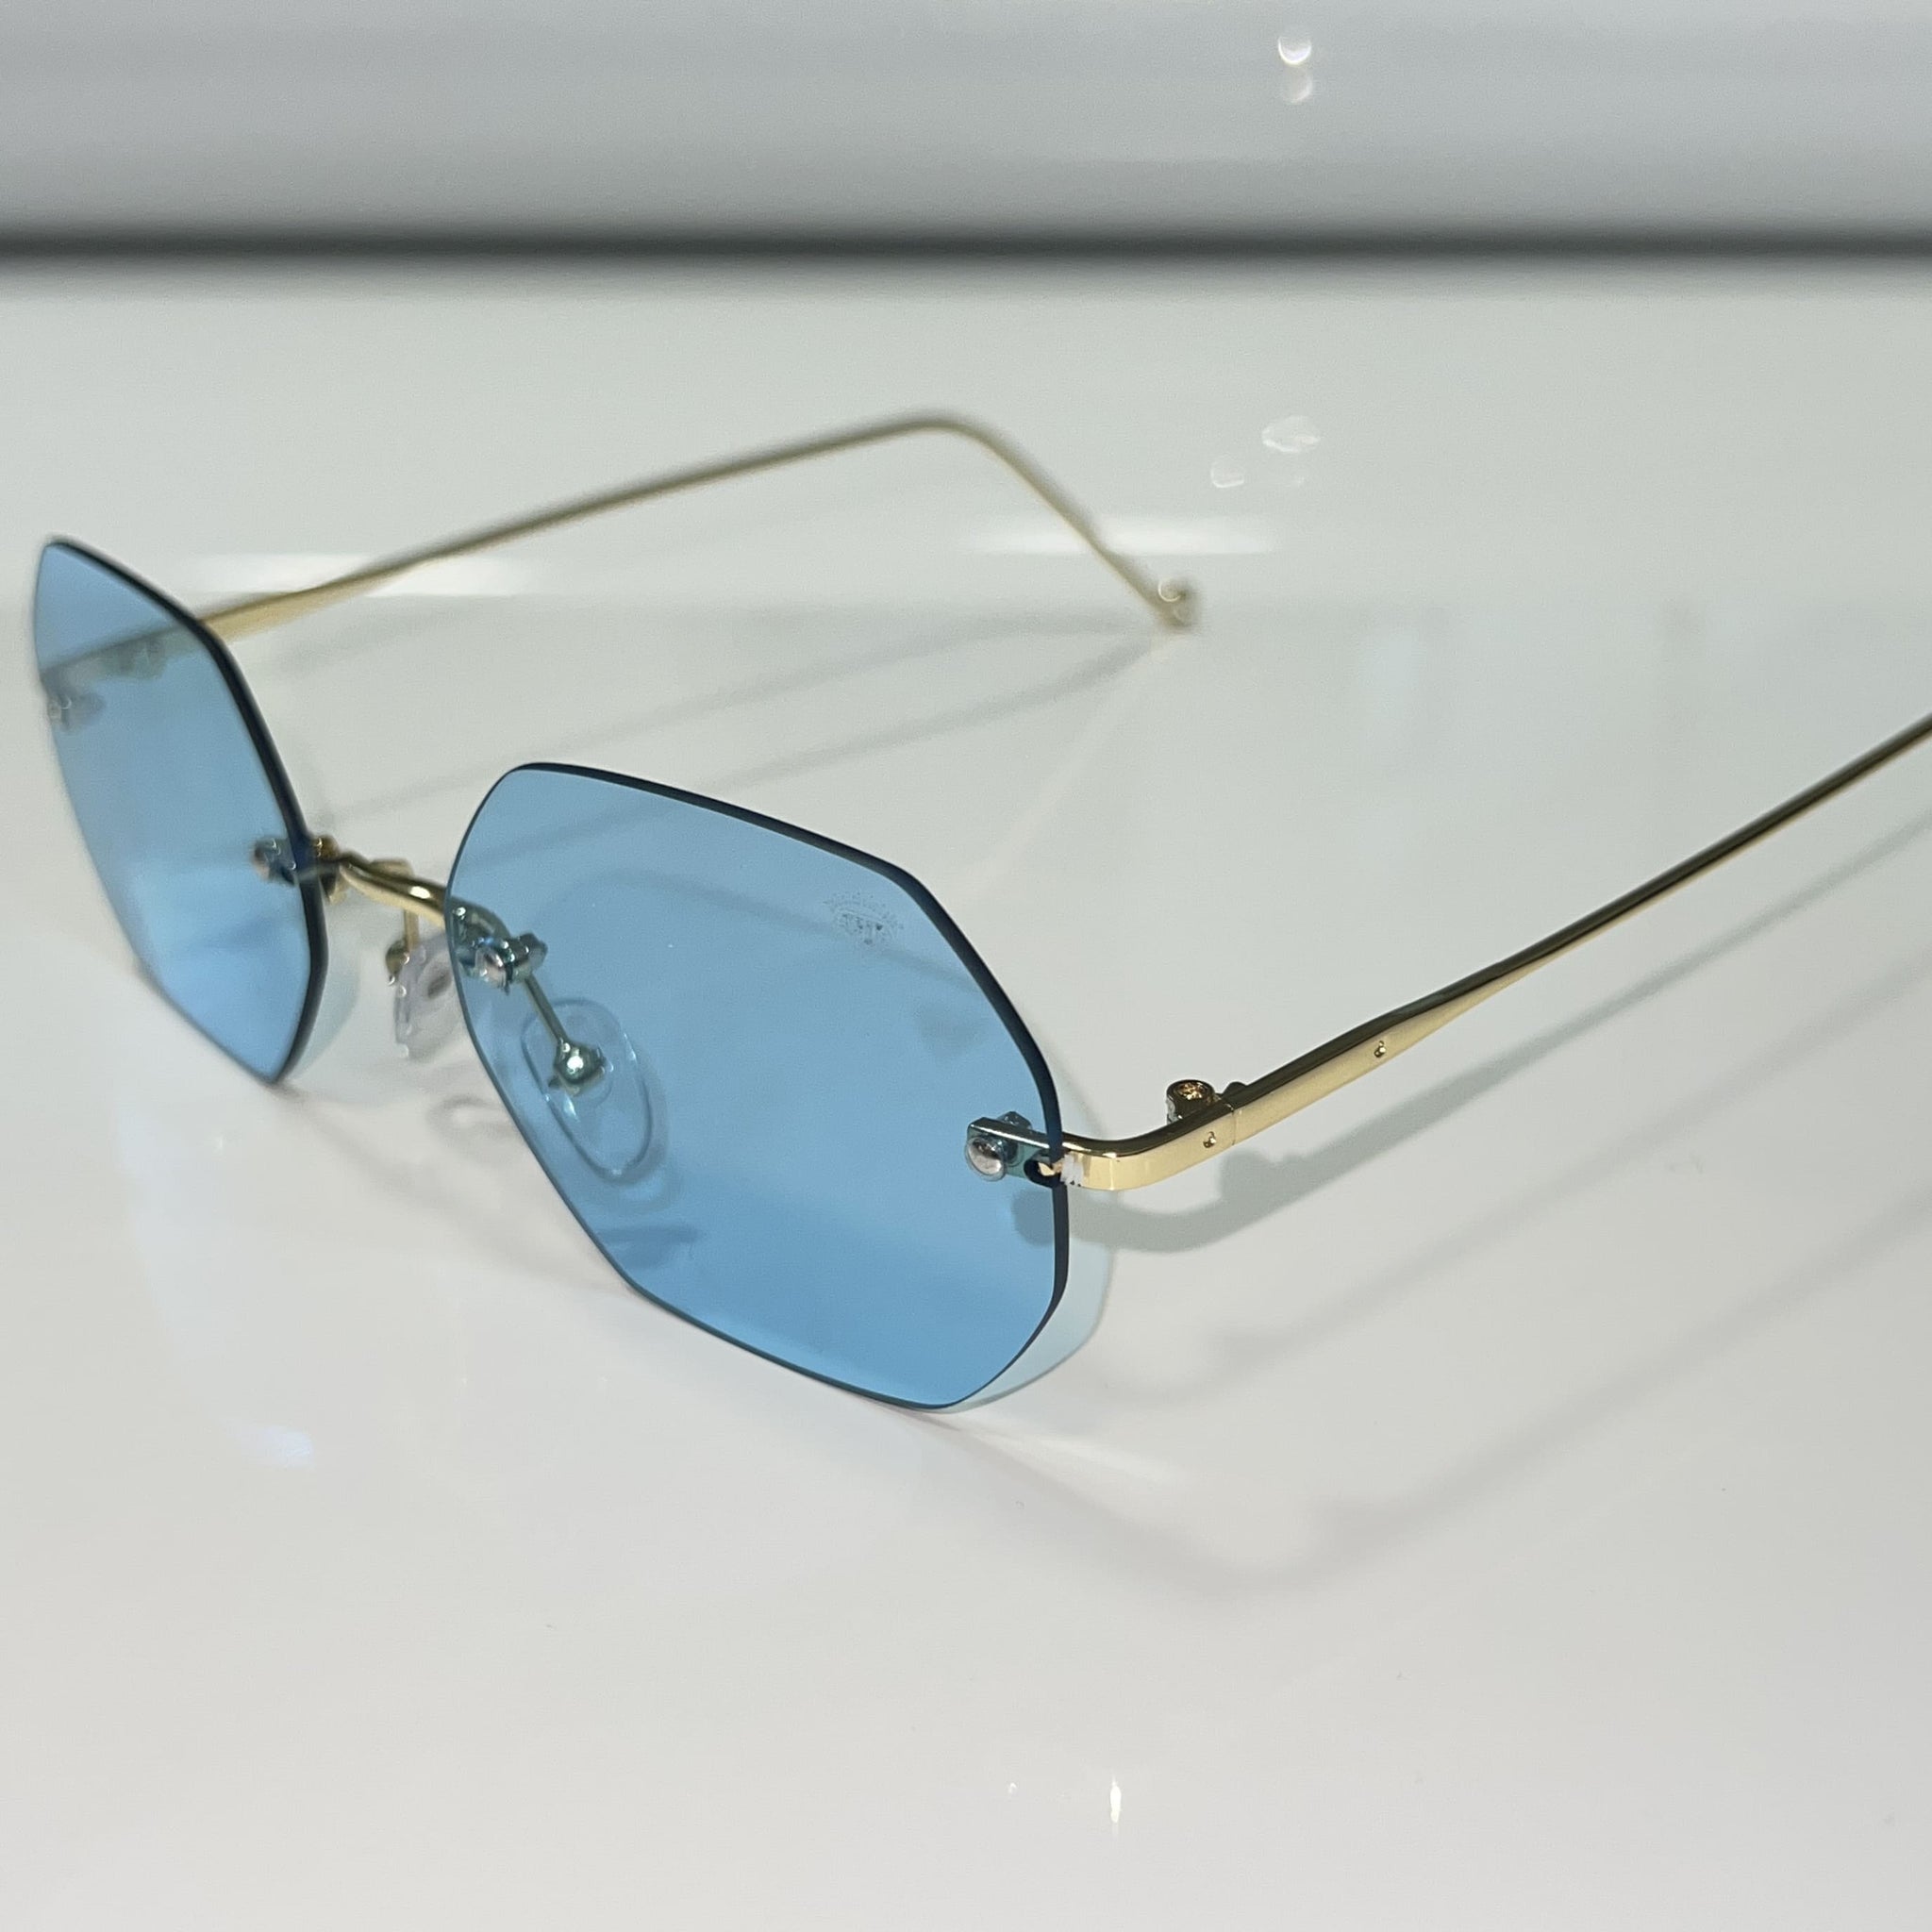 Star Glasses - Sehgal Glasses - 14k gold plated - Blue Shade